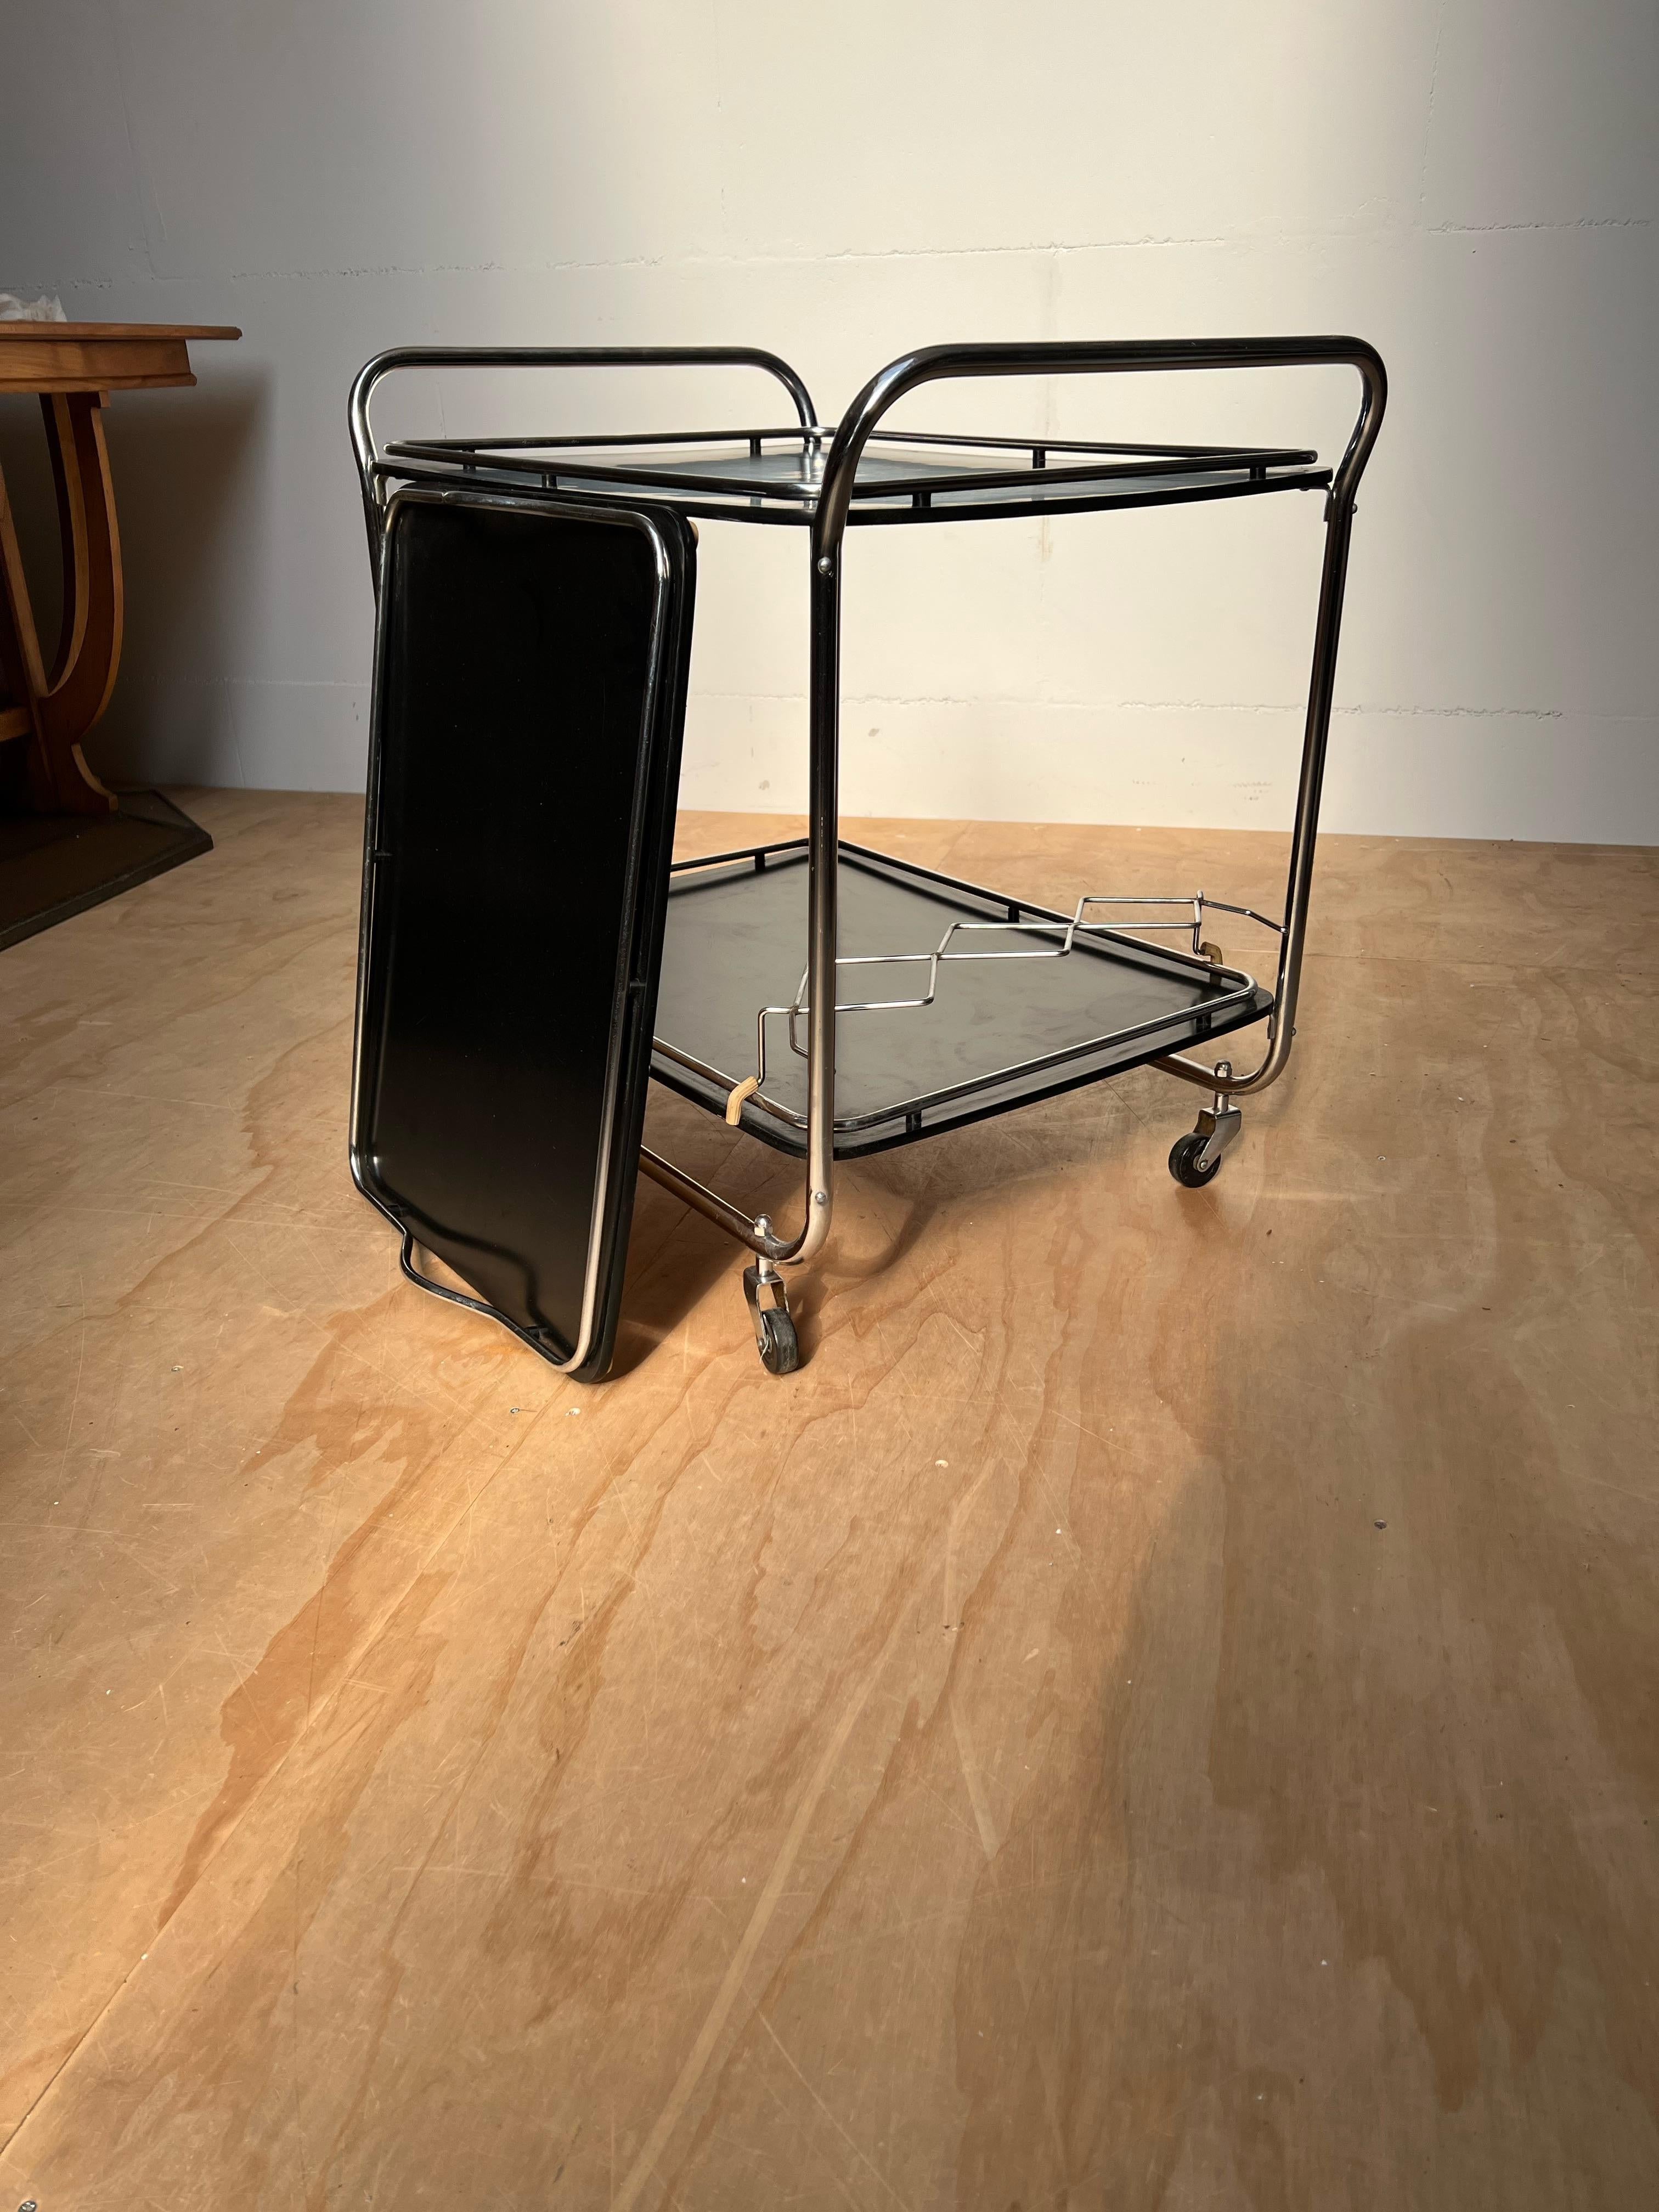 Midcentury Modern Drinks Trolley / Bar Cart w. Tray, Blackened Wood and Chrome For Sale 13